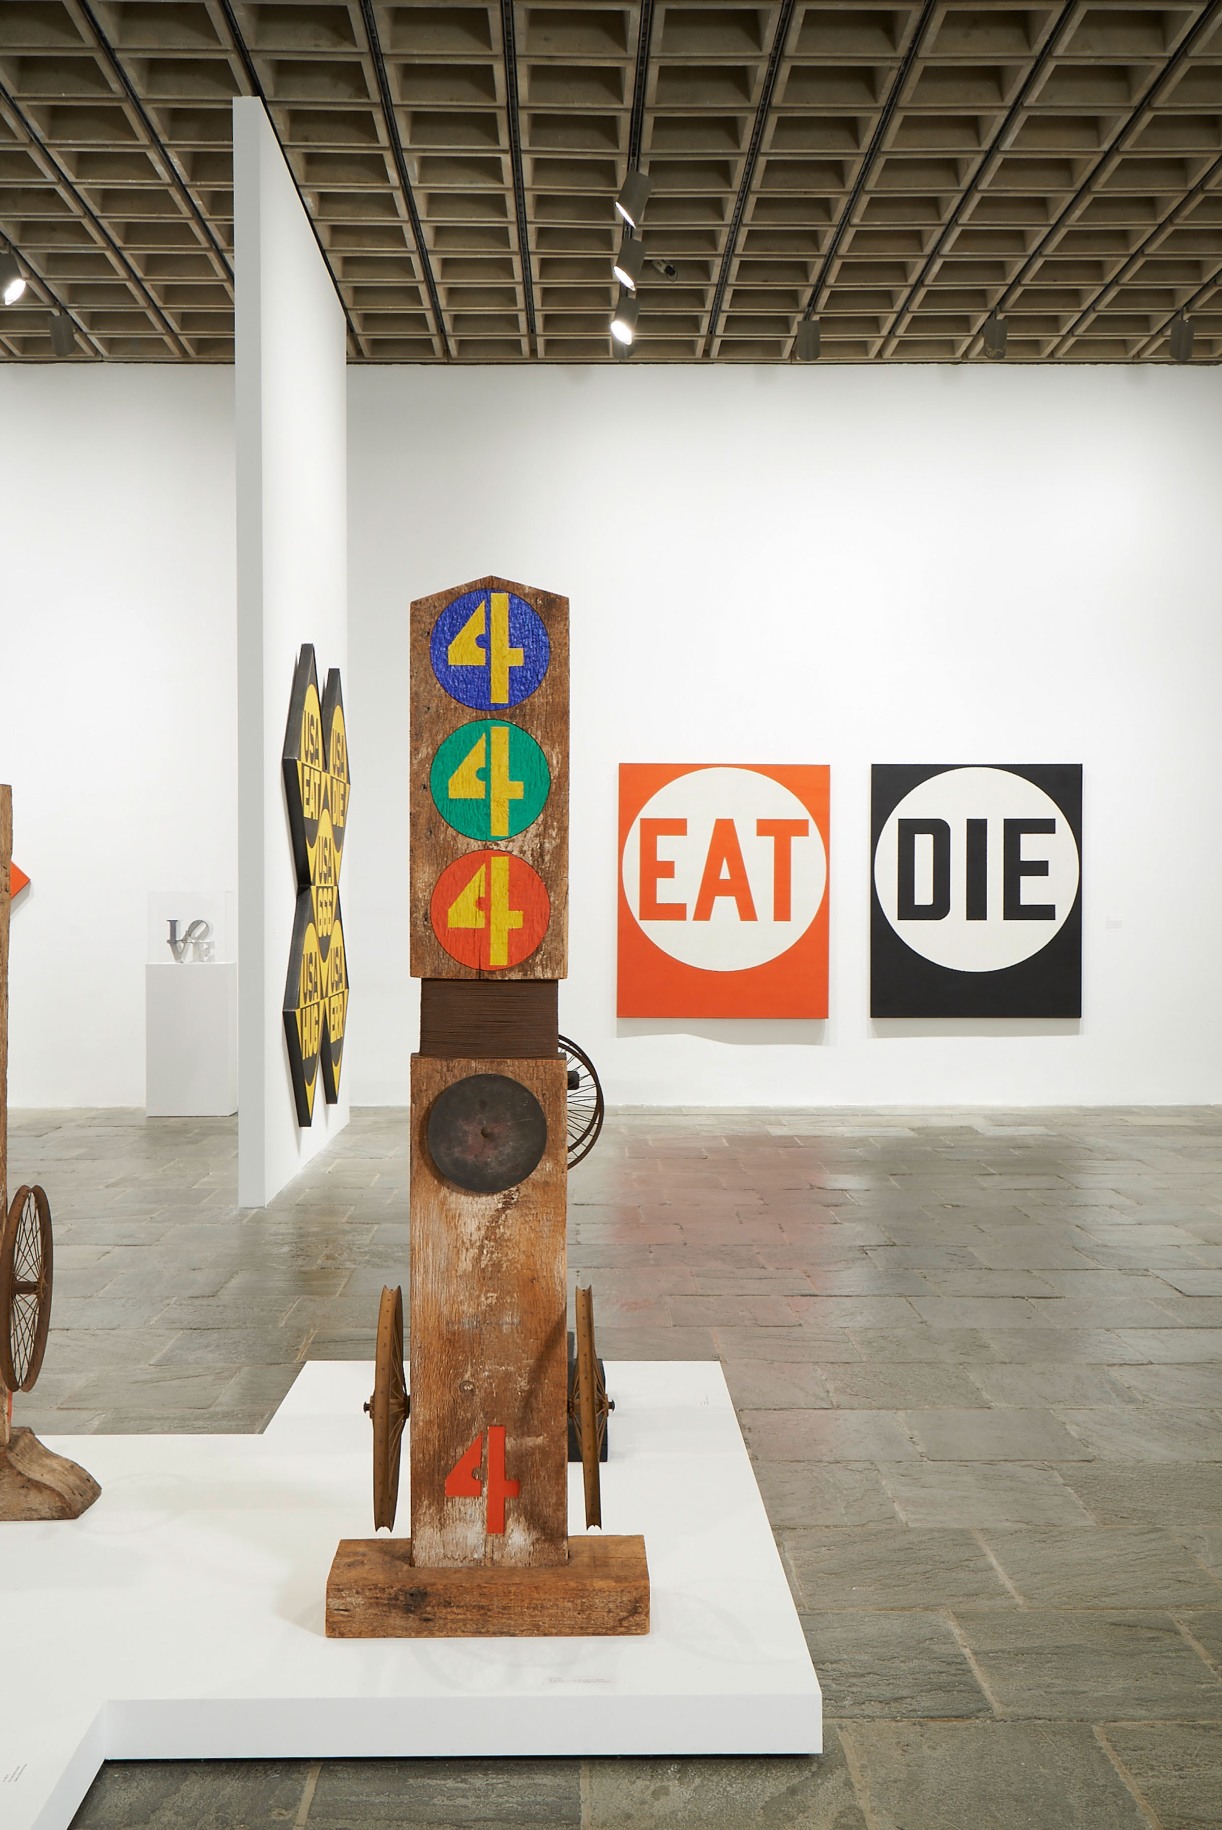 Installation view of&nbsp;Robert Indiana: Beyond LOVE, Whitney Museum of American Art, New York, September 26, 2013&ndash;January 5, 2014. Left to right, LOVE (1966&ndash;1968), USA 666 (The Sixth American Dream) (1964&ndash;66), Four (1959&ndash;62/1972), and Eat/Die (1962). Photo: Tom Powel Imaging; Artwork: &copy; Morgan Art Foundation Ltd./Artists Rights Society (ARS), NY